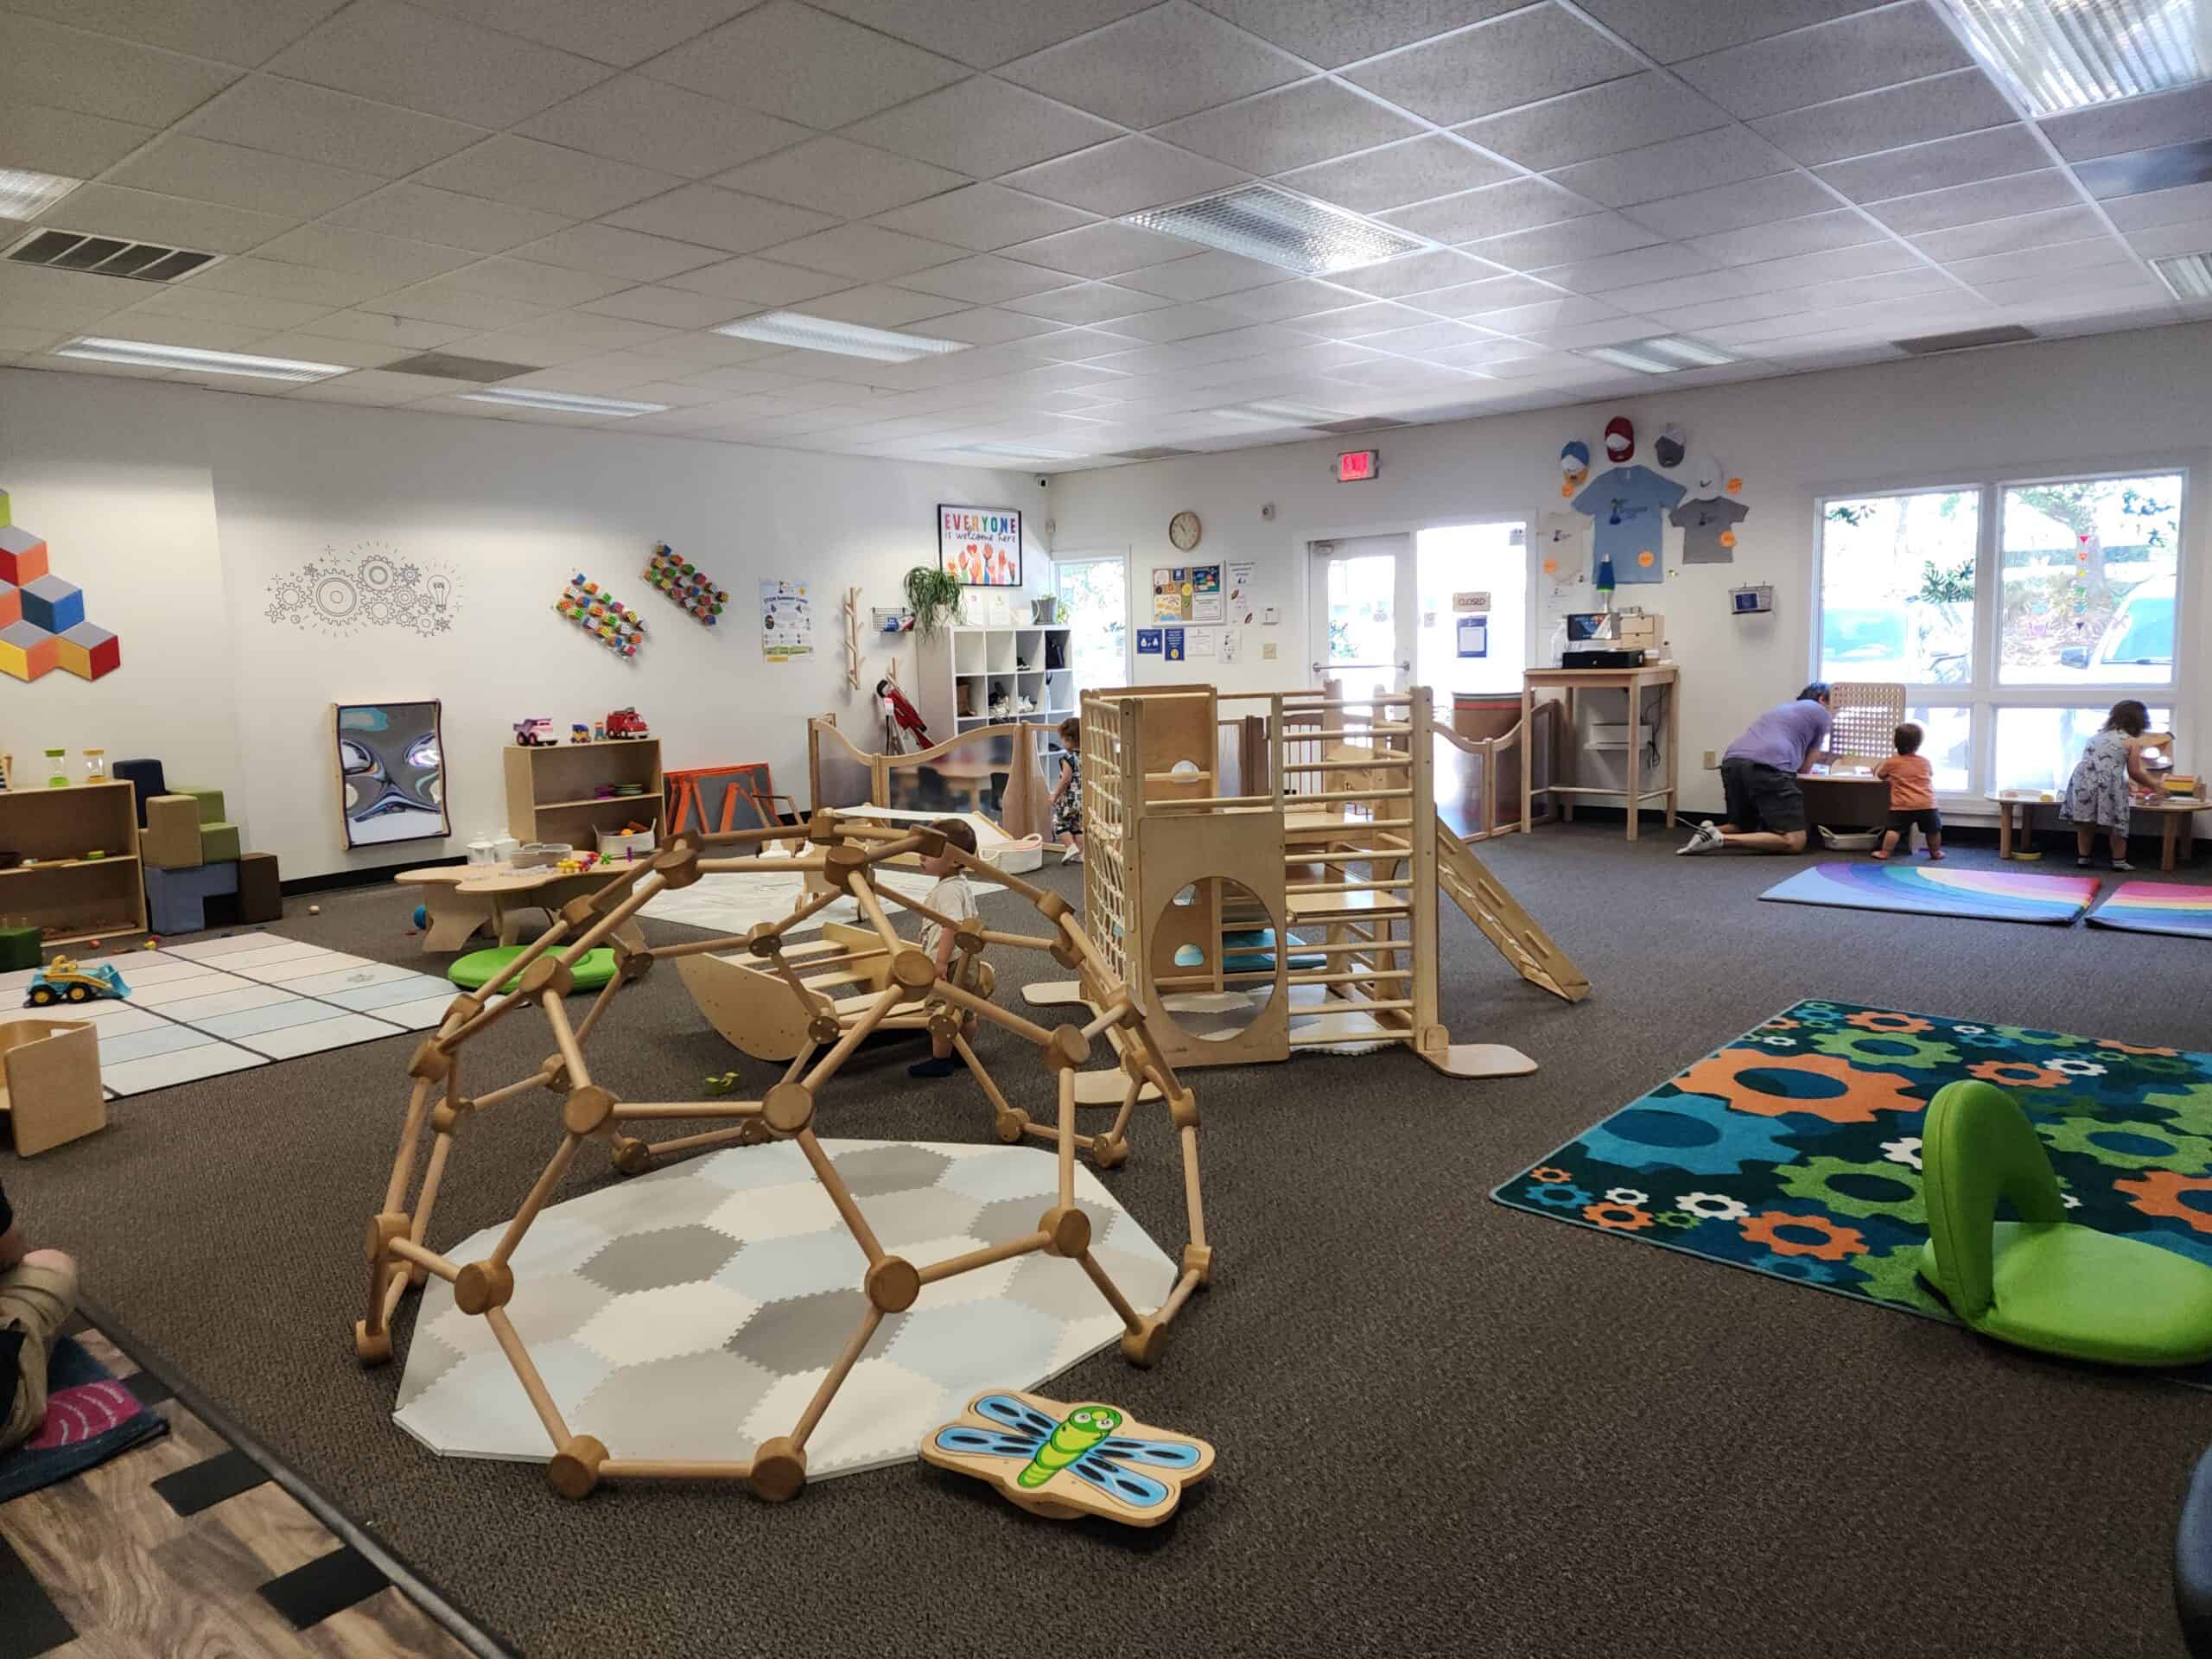 A spacious indoor play area in Durham is filled with various wooden play structures, toys, and colorful mats. Children and an adult engage in different activities, with natural light streaming through large windows. The room has a vibrant, welcoming atmosphere, featuring educational wall decorations and organized play zones.